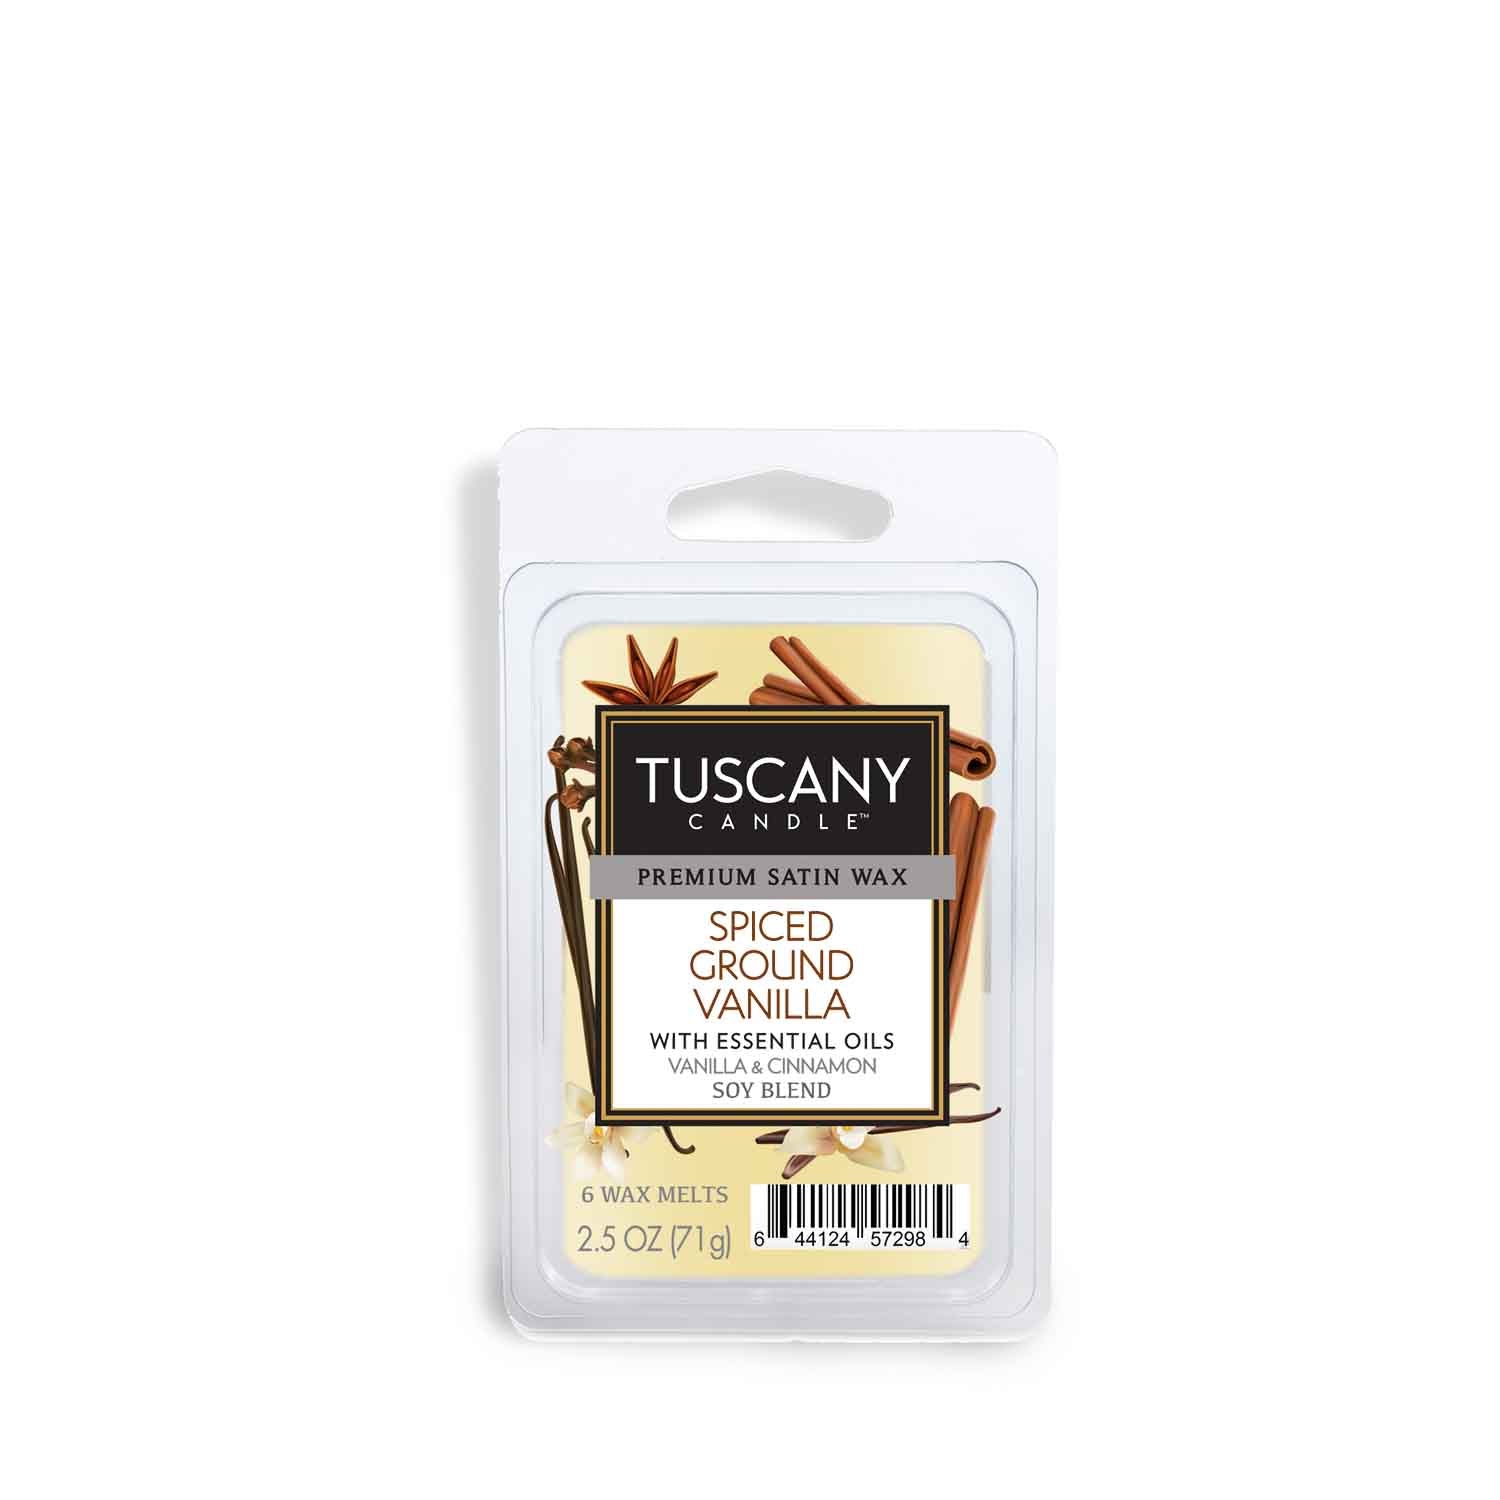 A luxurious Tuscany Candle® Spiced Ground Vanilla Scented Wax Melt (2.5 oz) that infuses any space with an exquisite fragrance.